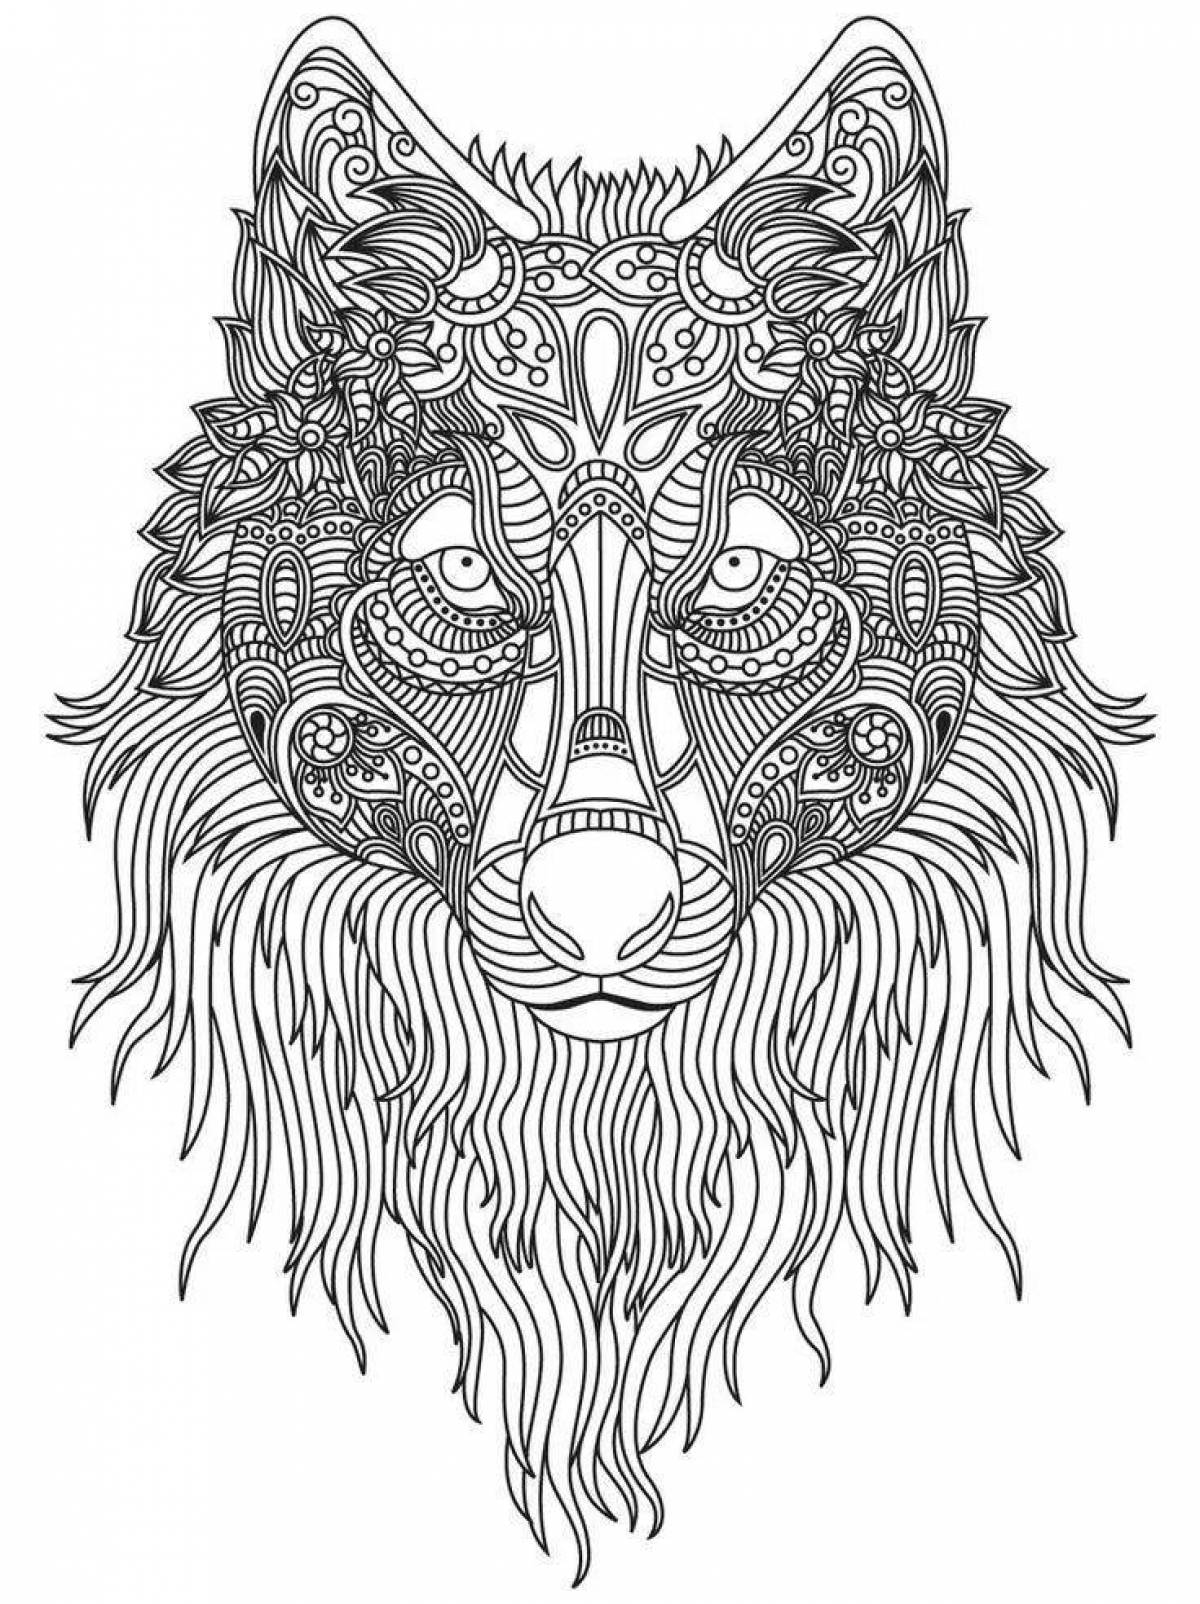 Charming coloring book antistress wolf